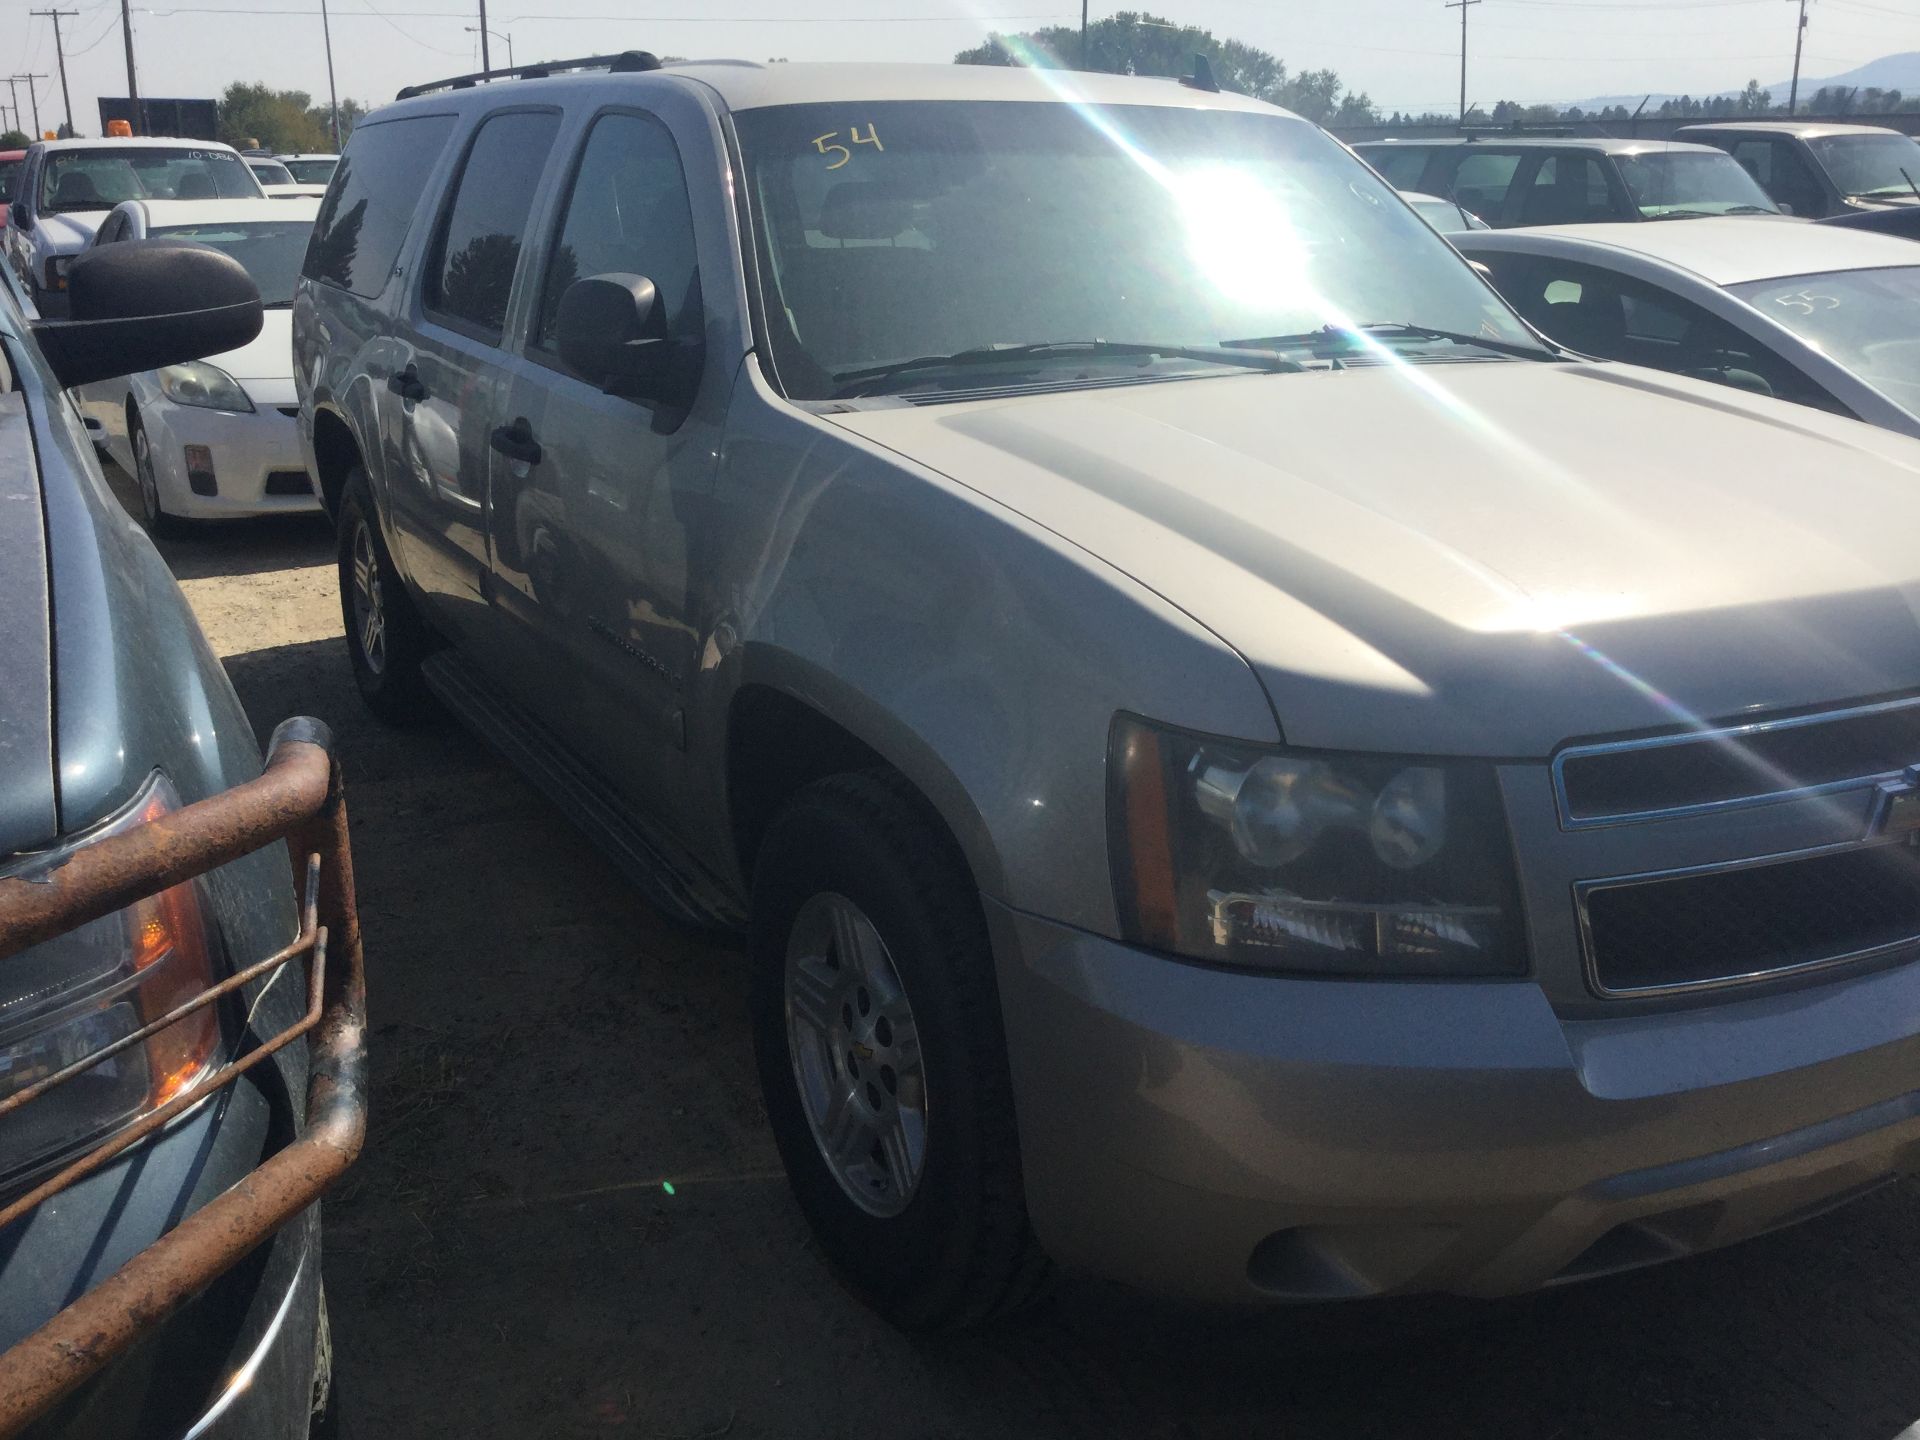 Year: 2007 Make: Chevy Model: Suburban Type: SUV Vin#: 230757 Mileage/Hours: 132500 5.3L, 2WD, auto, - Image 3 of 4